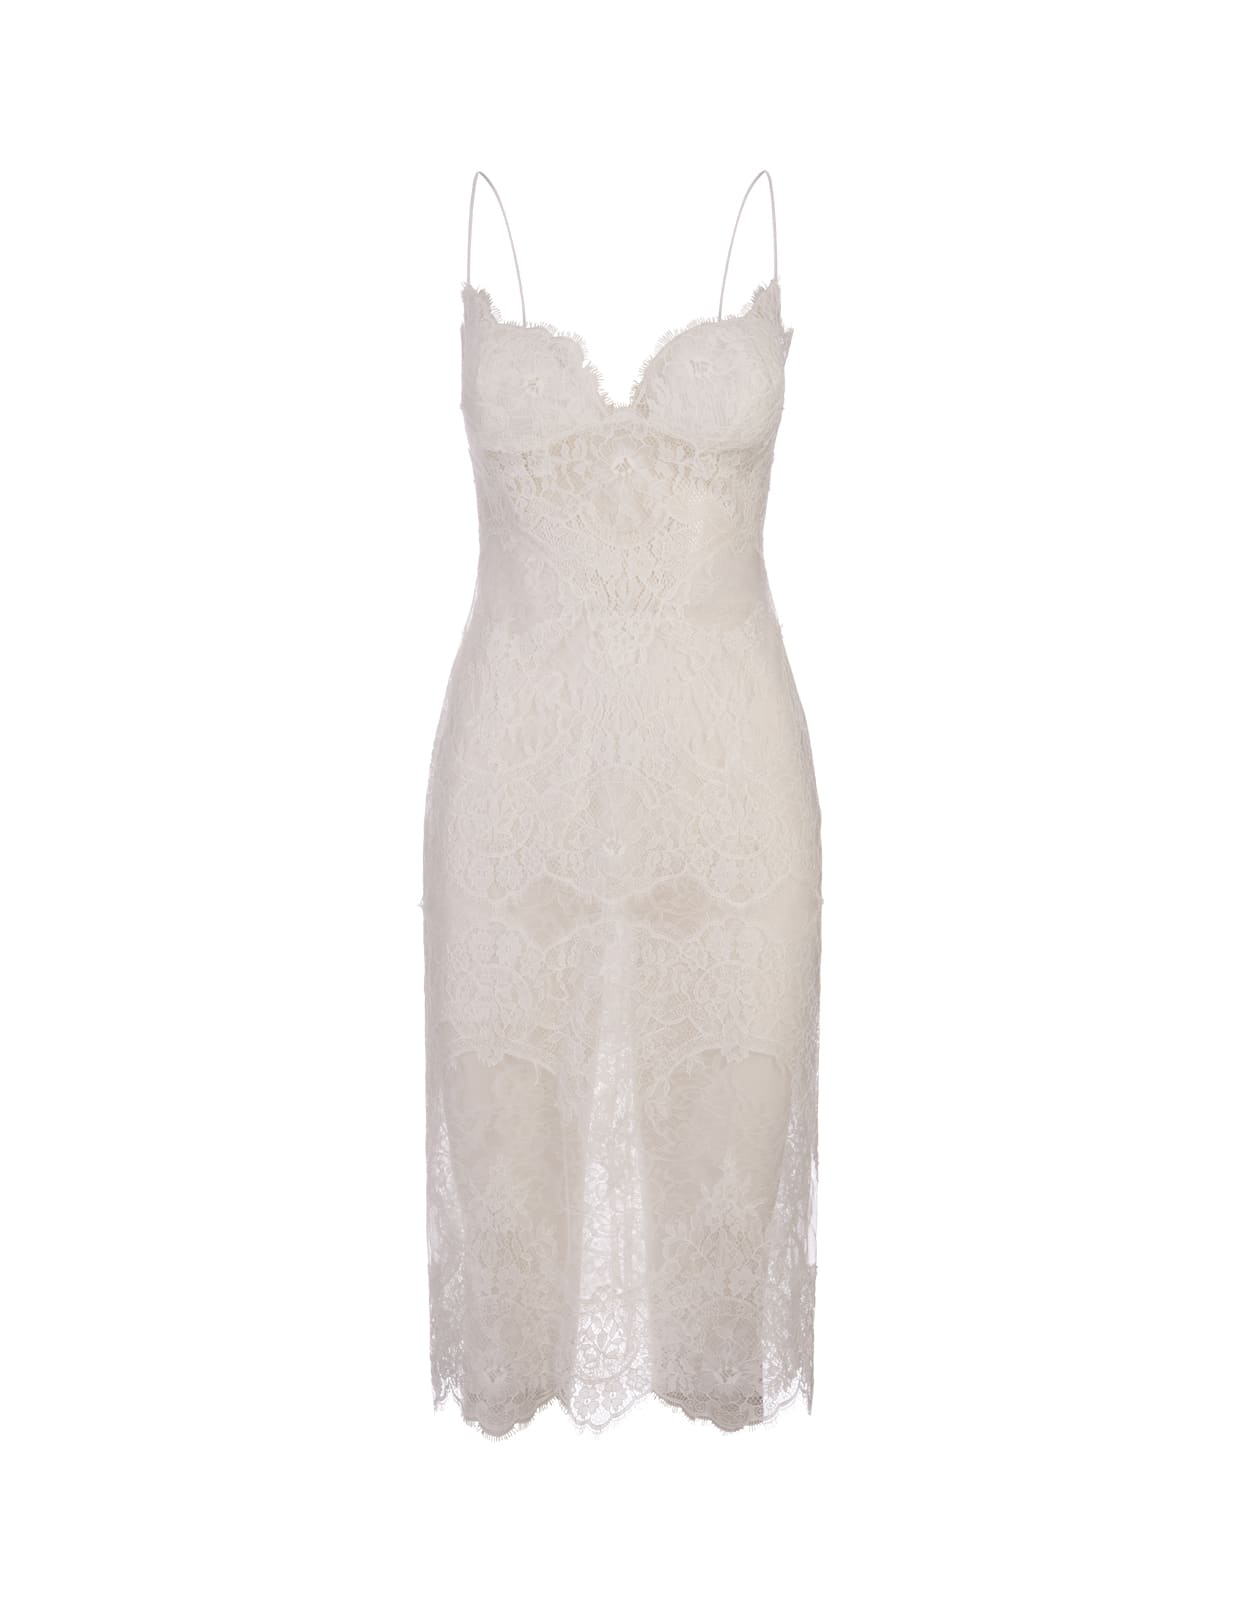 All-over White Lace Lingerie Dress